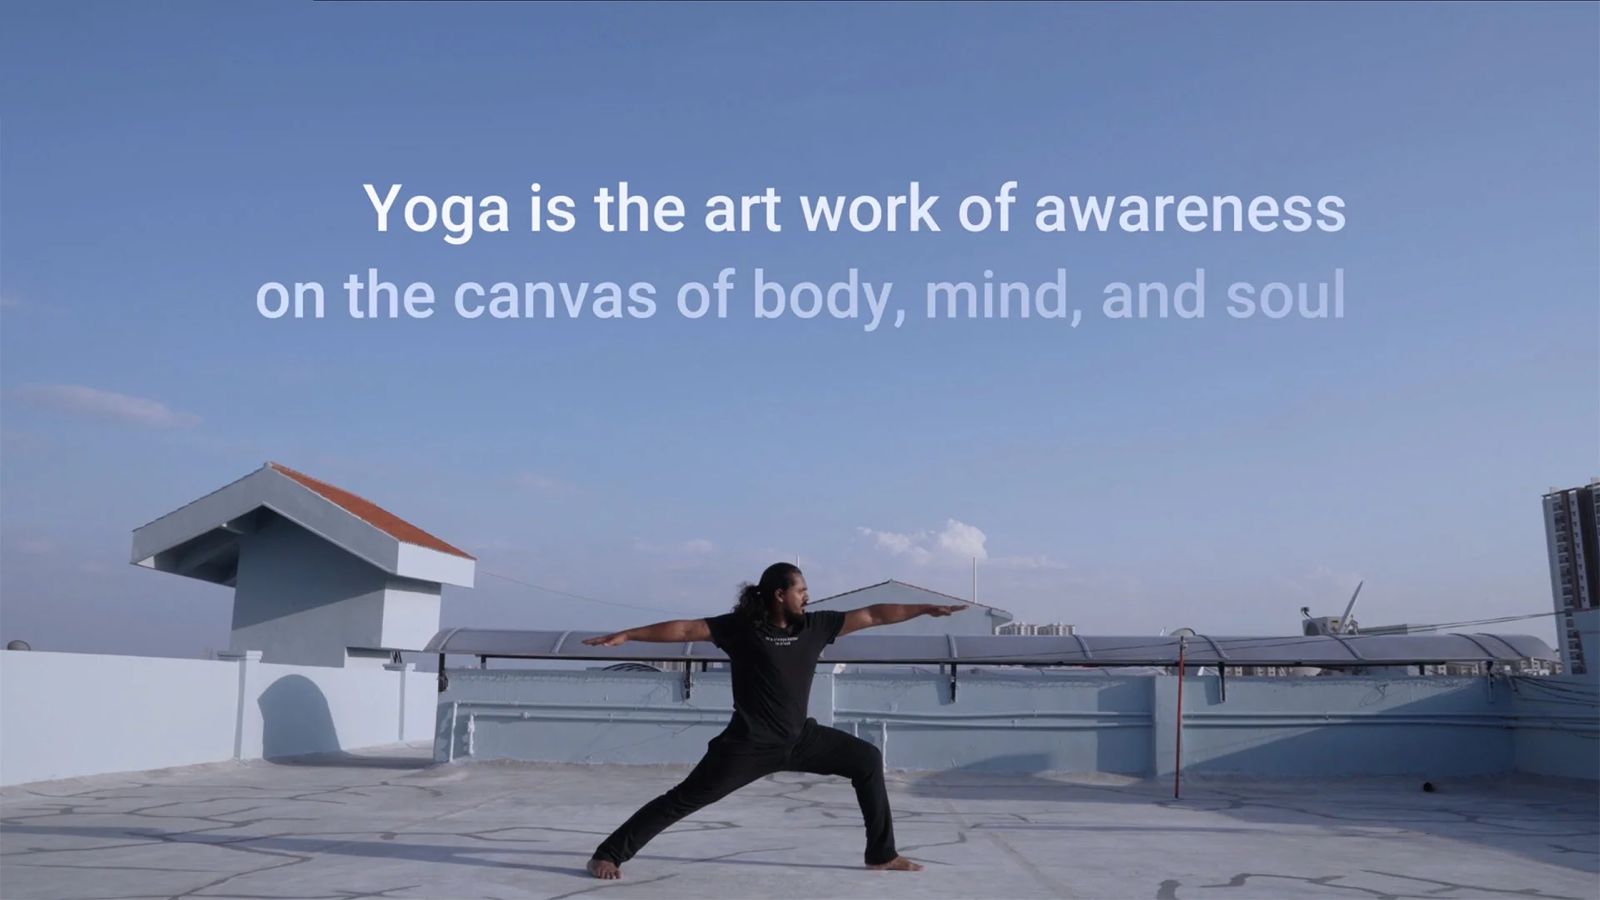  Yoga is the art work of awareness on the canvas of body, mind, and soul 